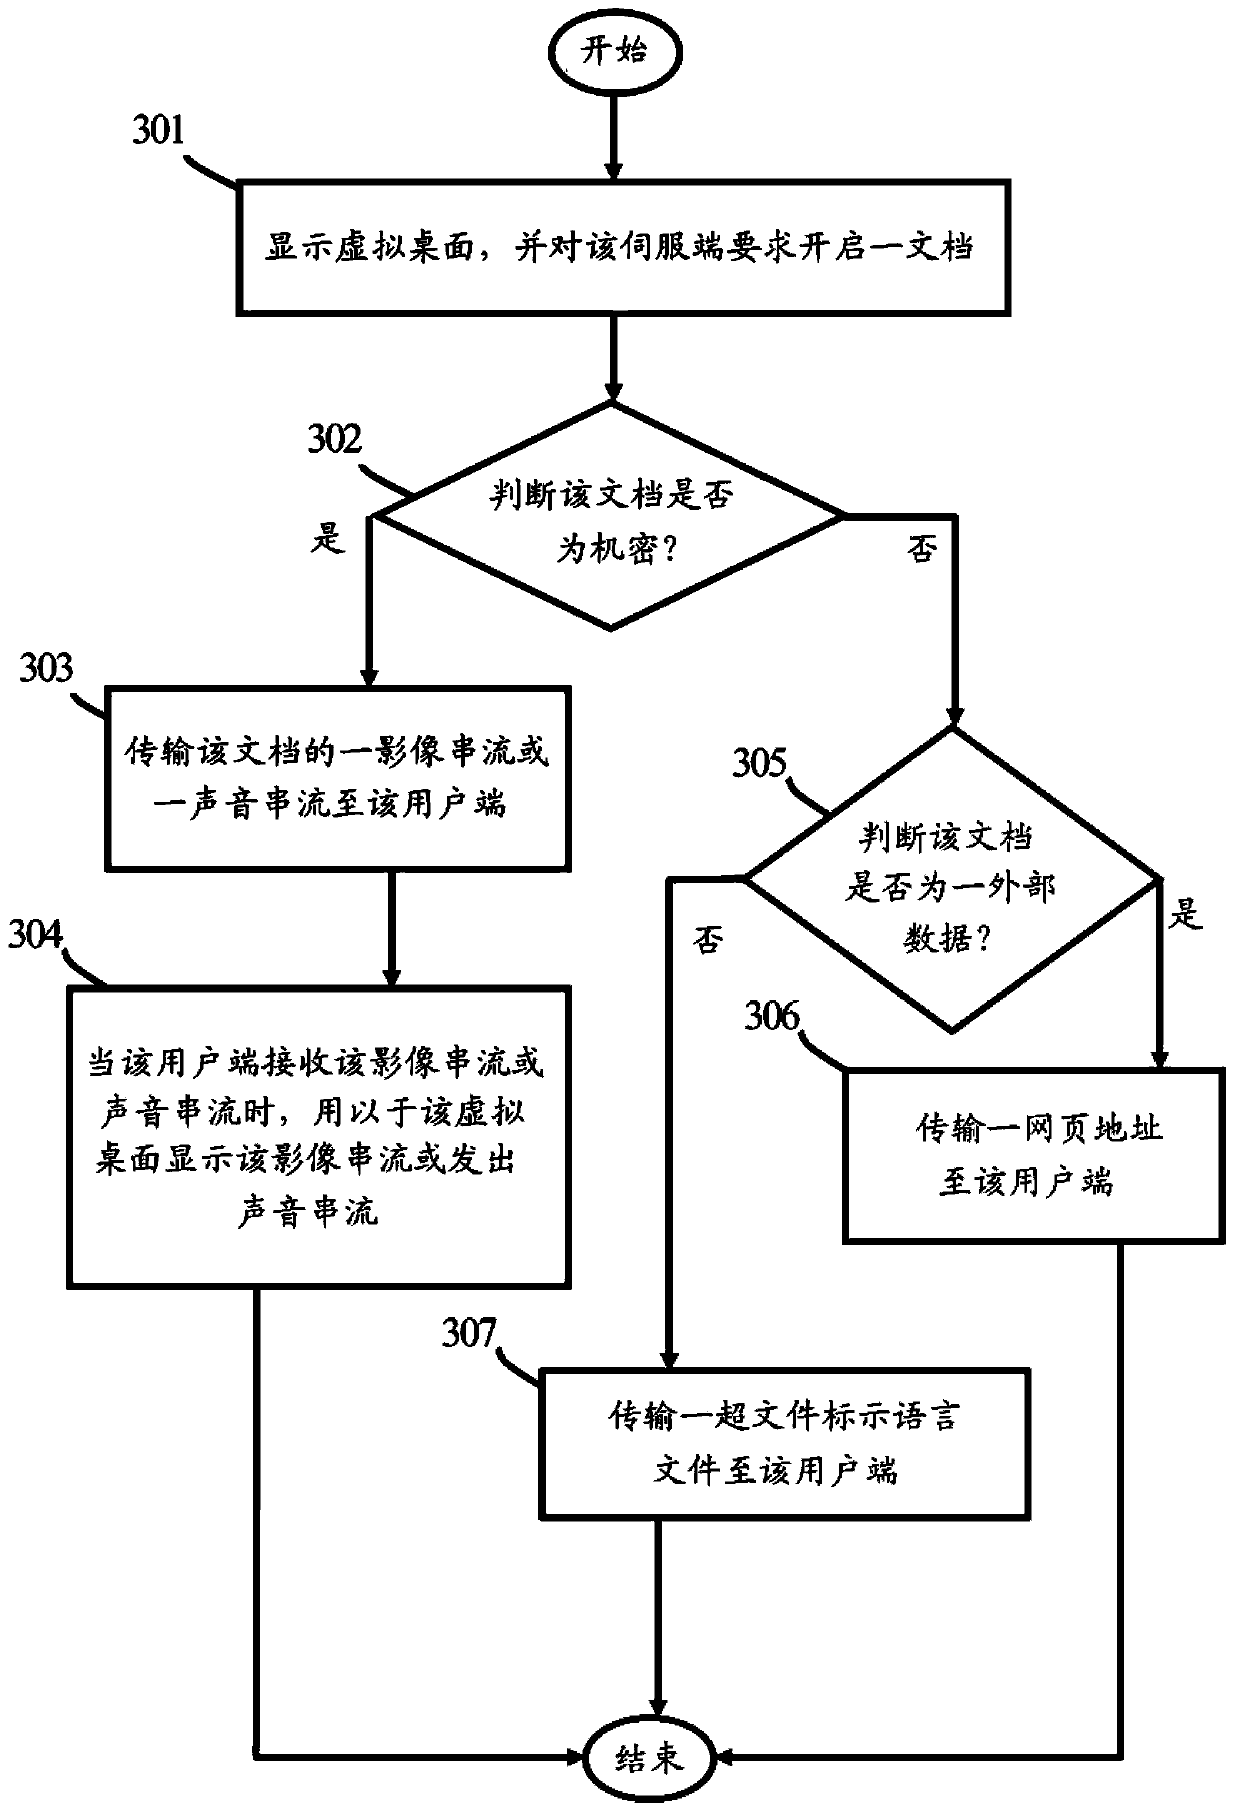 Virtual file transmission system and method of transmitting virtual file thereof